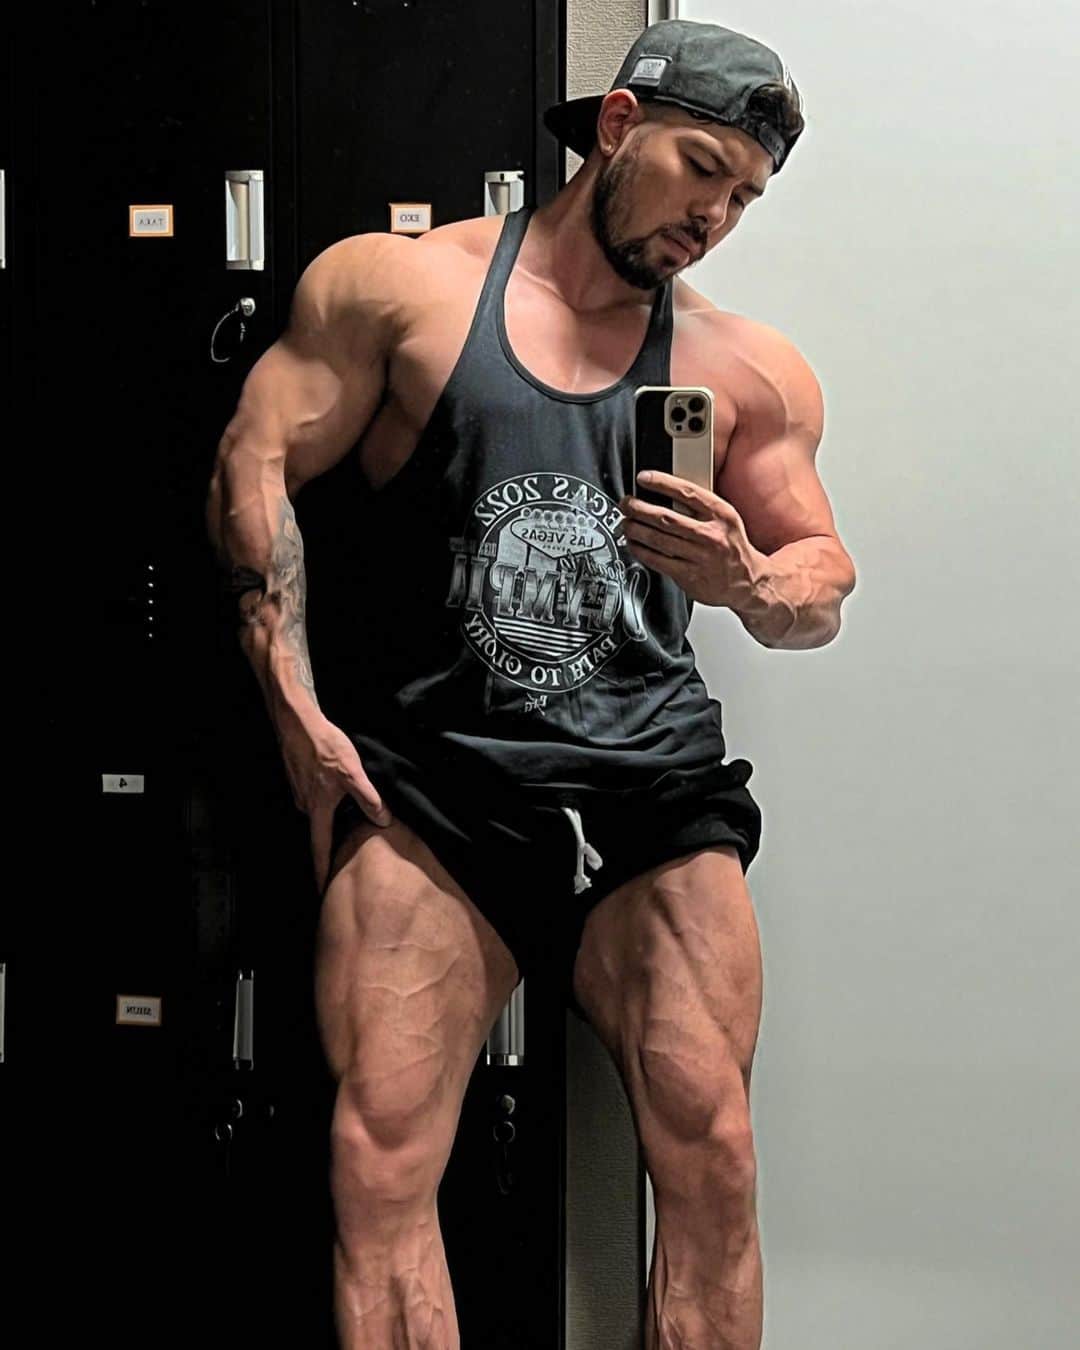 Kanekin Fitnessのインスタグラム：「3週間脚鍛えてない割には悪くないかな。 Legs don’t look too bad for not working them out for 3 weeks. Can’t wait to train them again.」